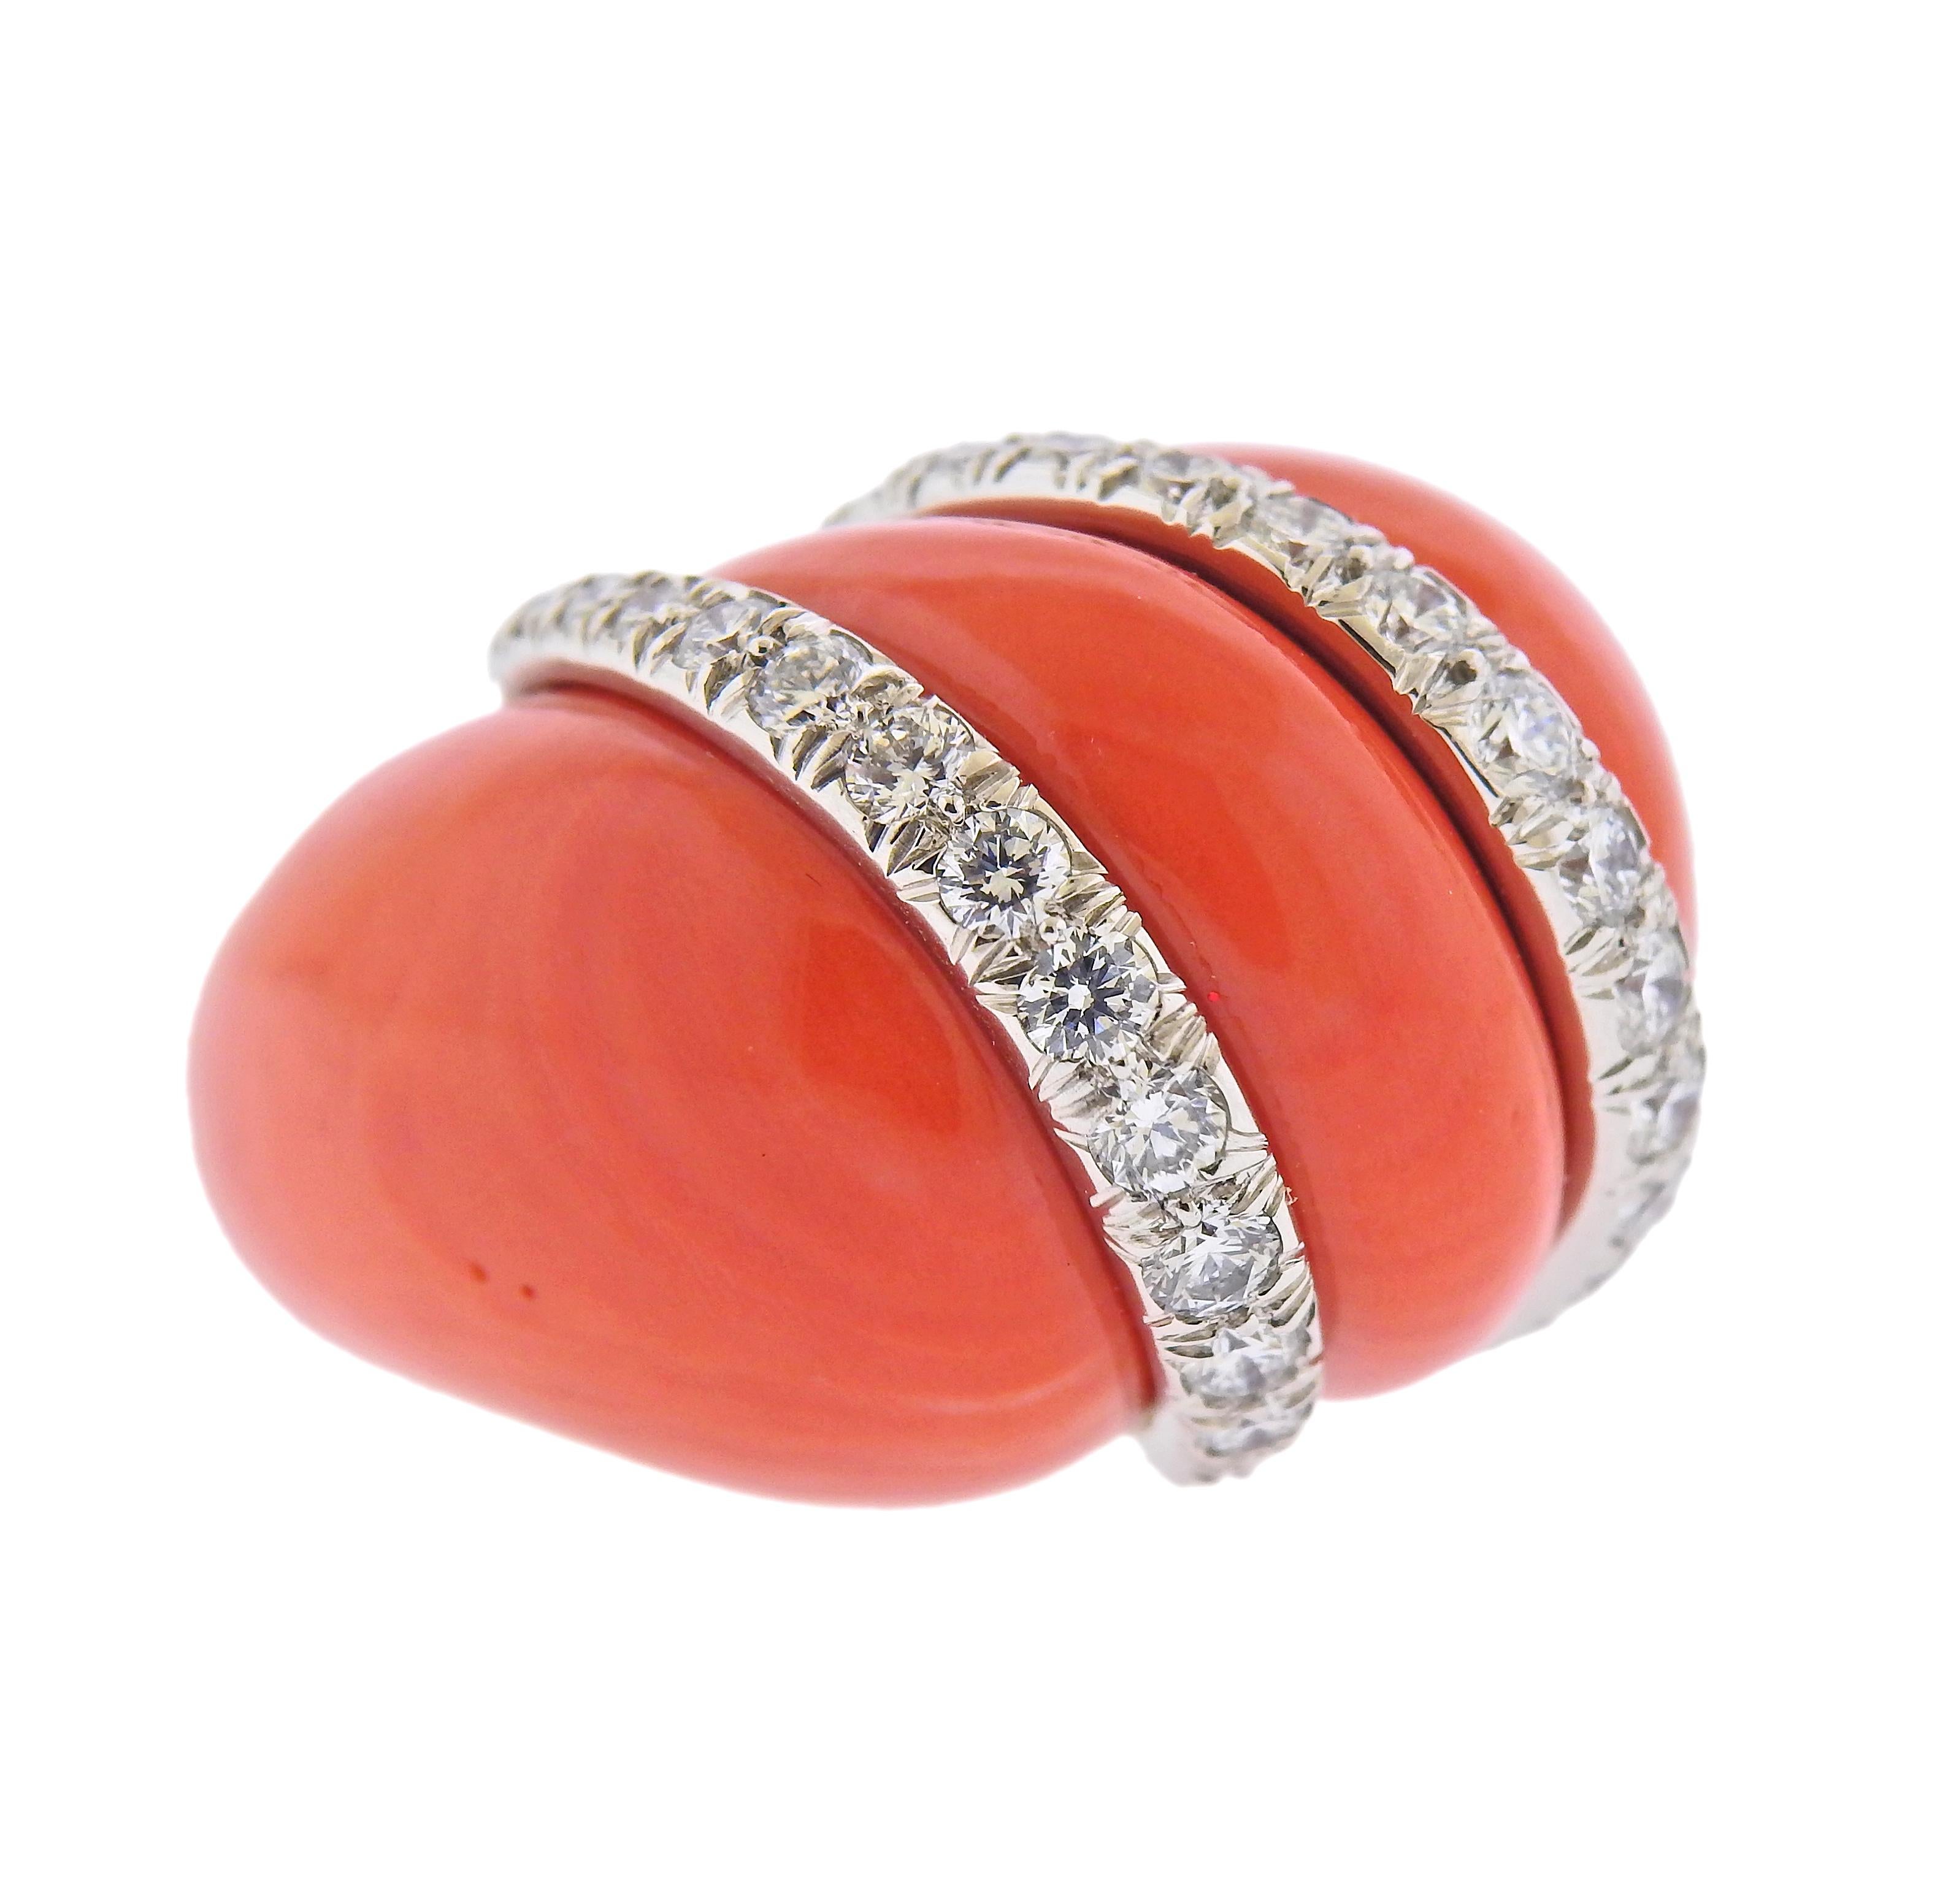 Impressive David Webb ring in 18k gold and platinum, set with coral top and approx. 1.50ctw in diamonds. Ring size - 5, ring top - 20mm wide, sits approx. 18mm from the finger. Comes with David Webb box and certificate. Marked: David Webb, 18k,